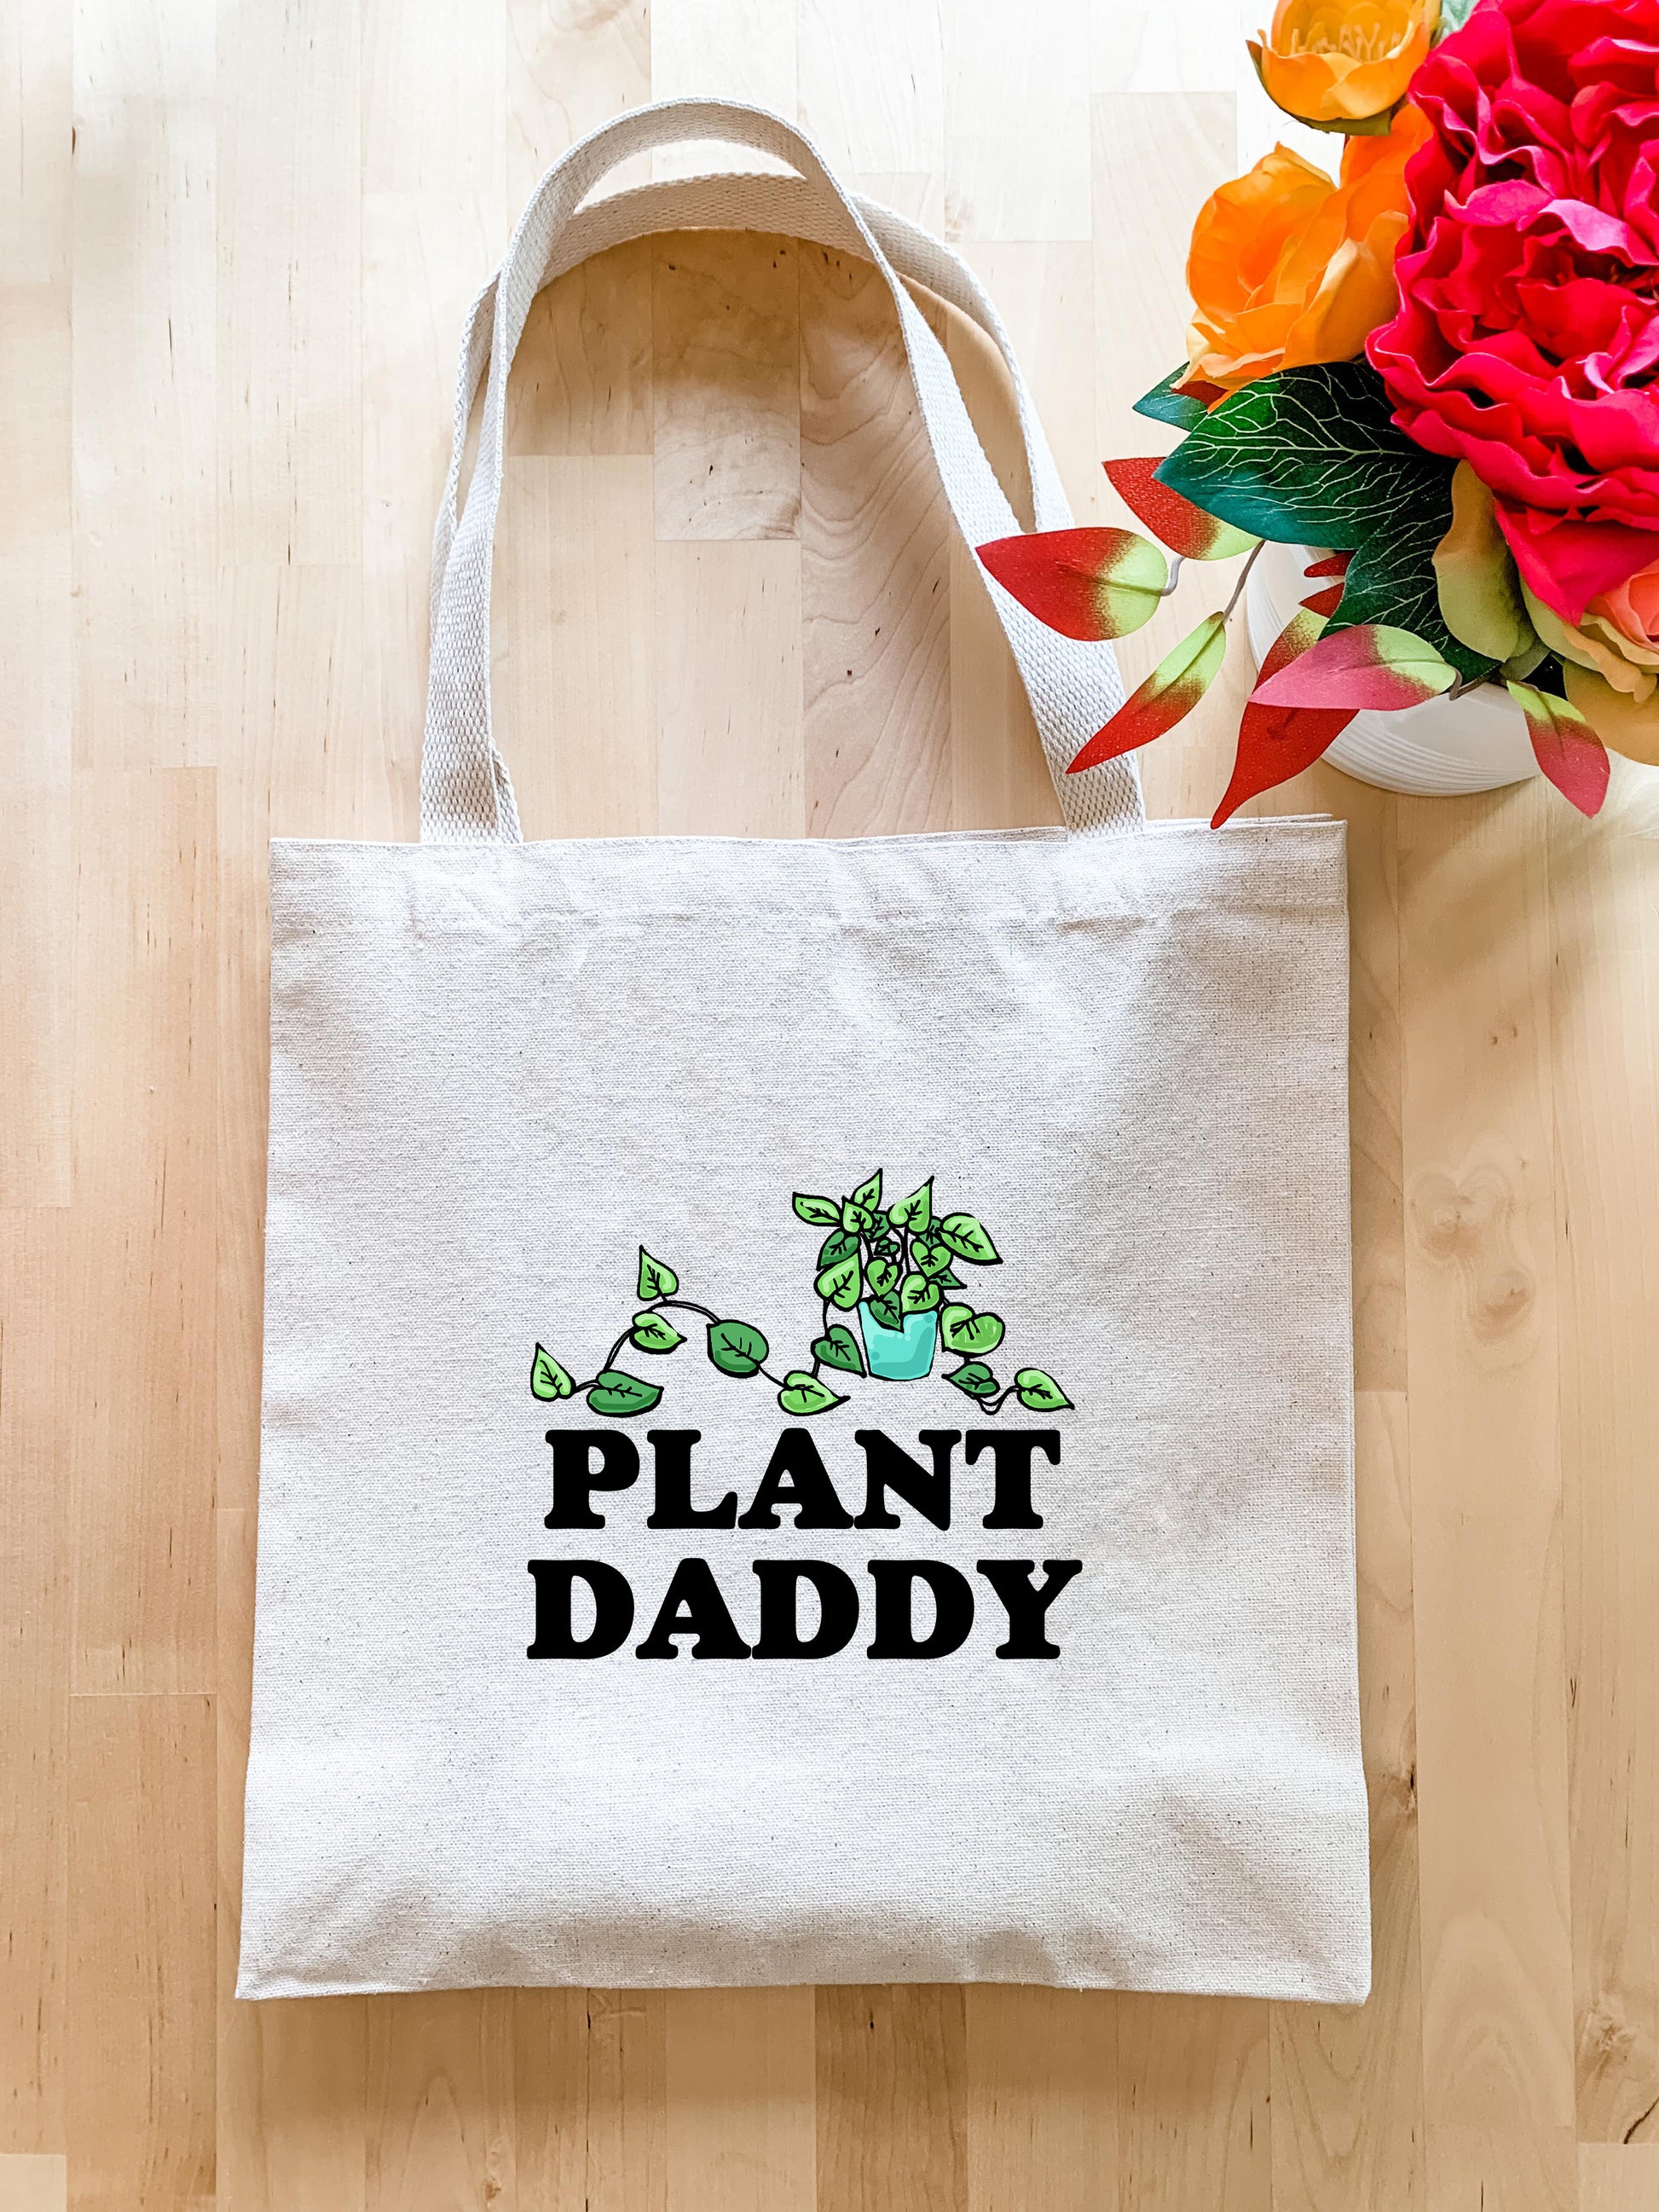 a plant daddy tote bag next to a bouquet of flowers